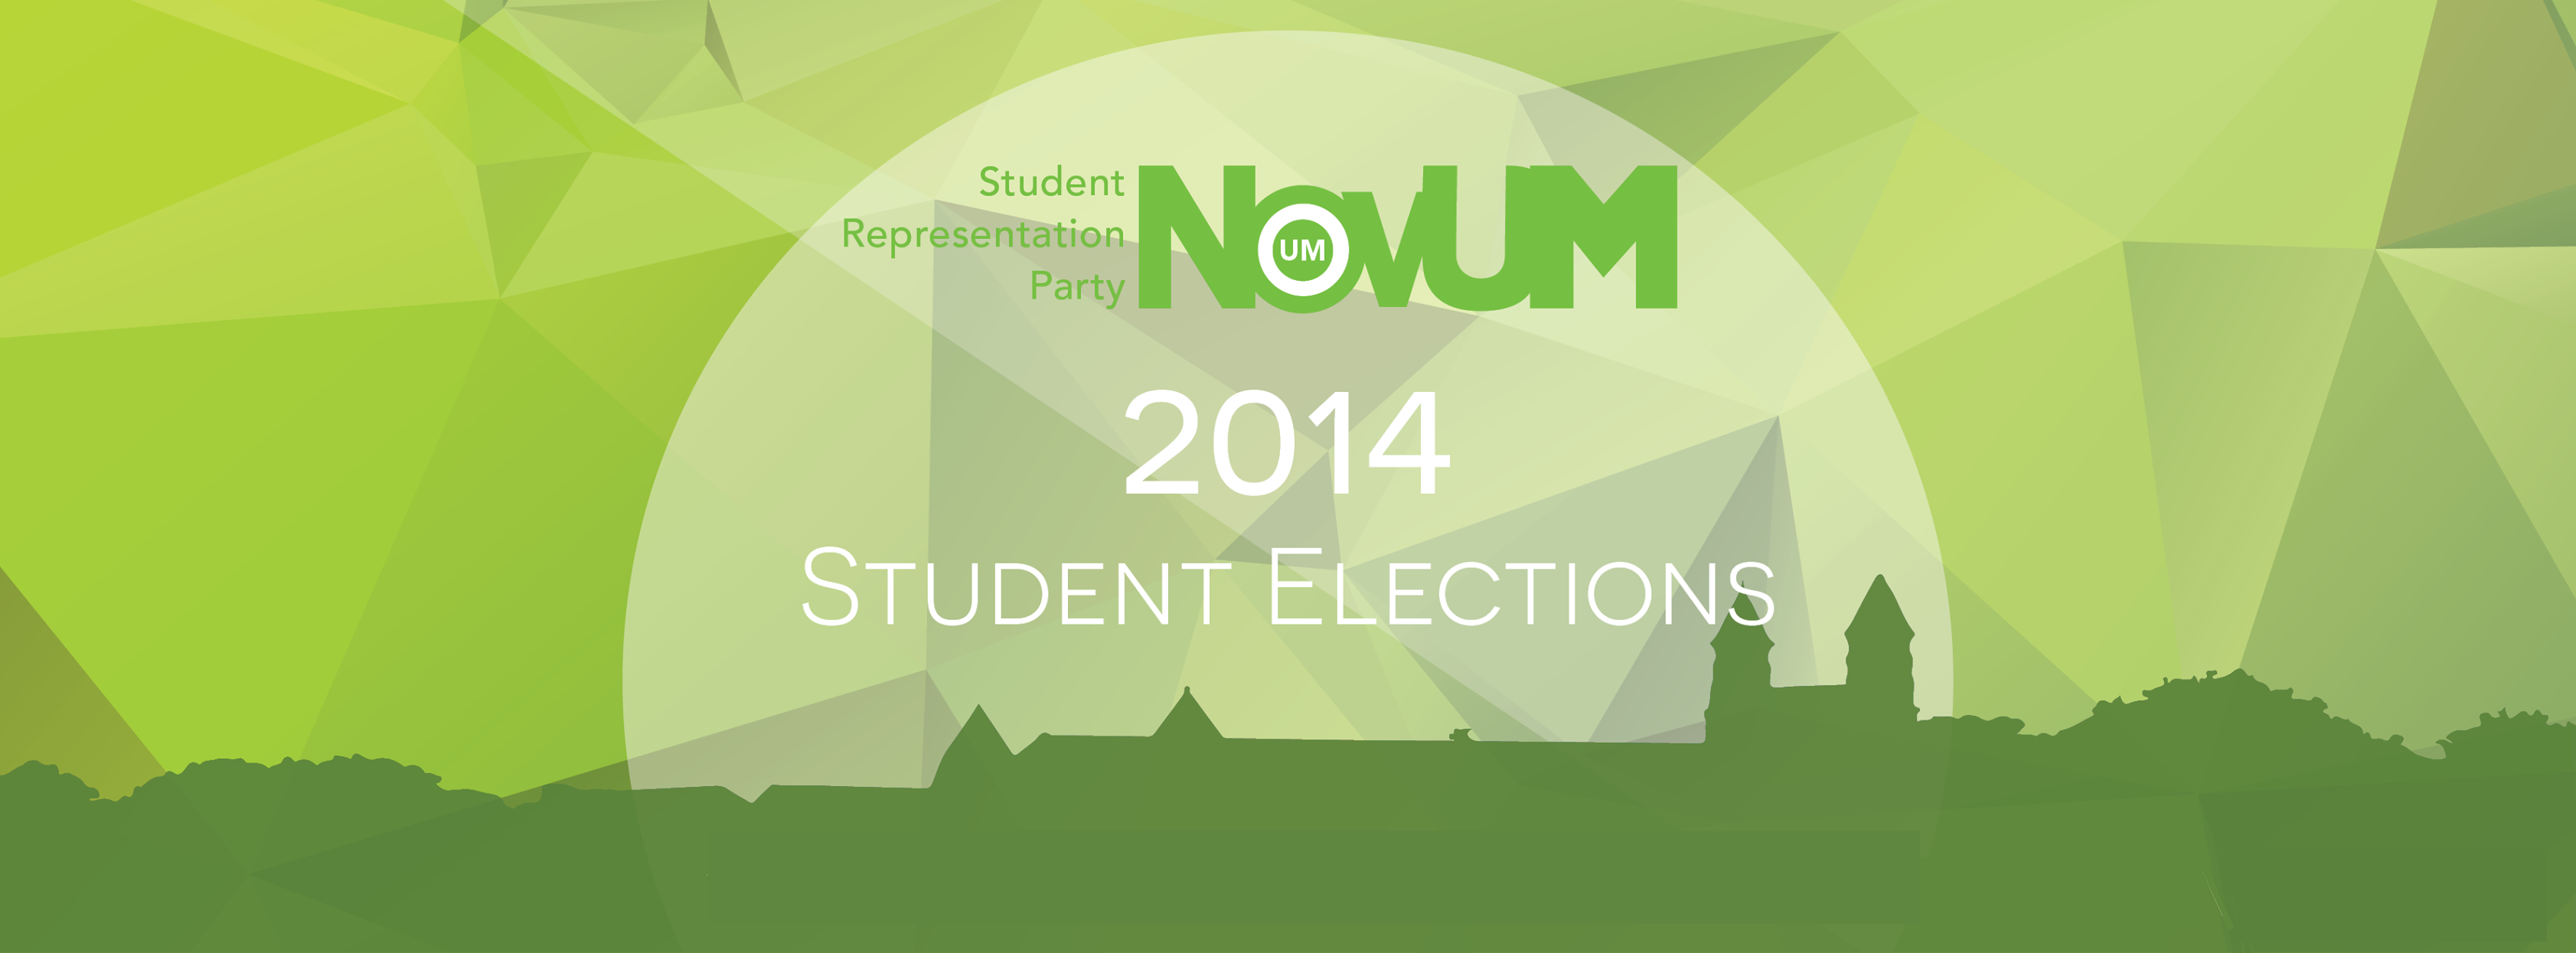 Elections 2014